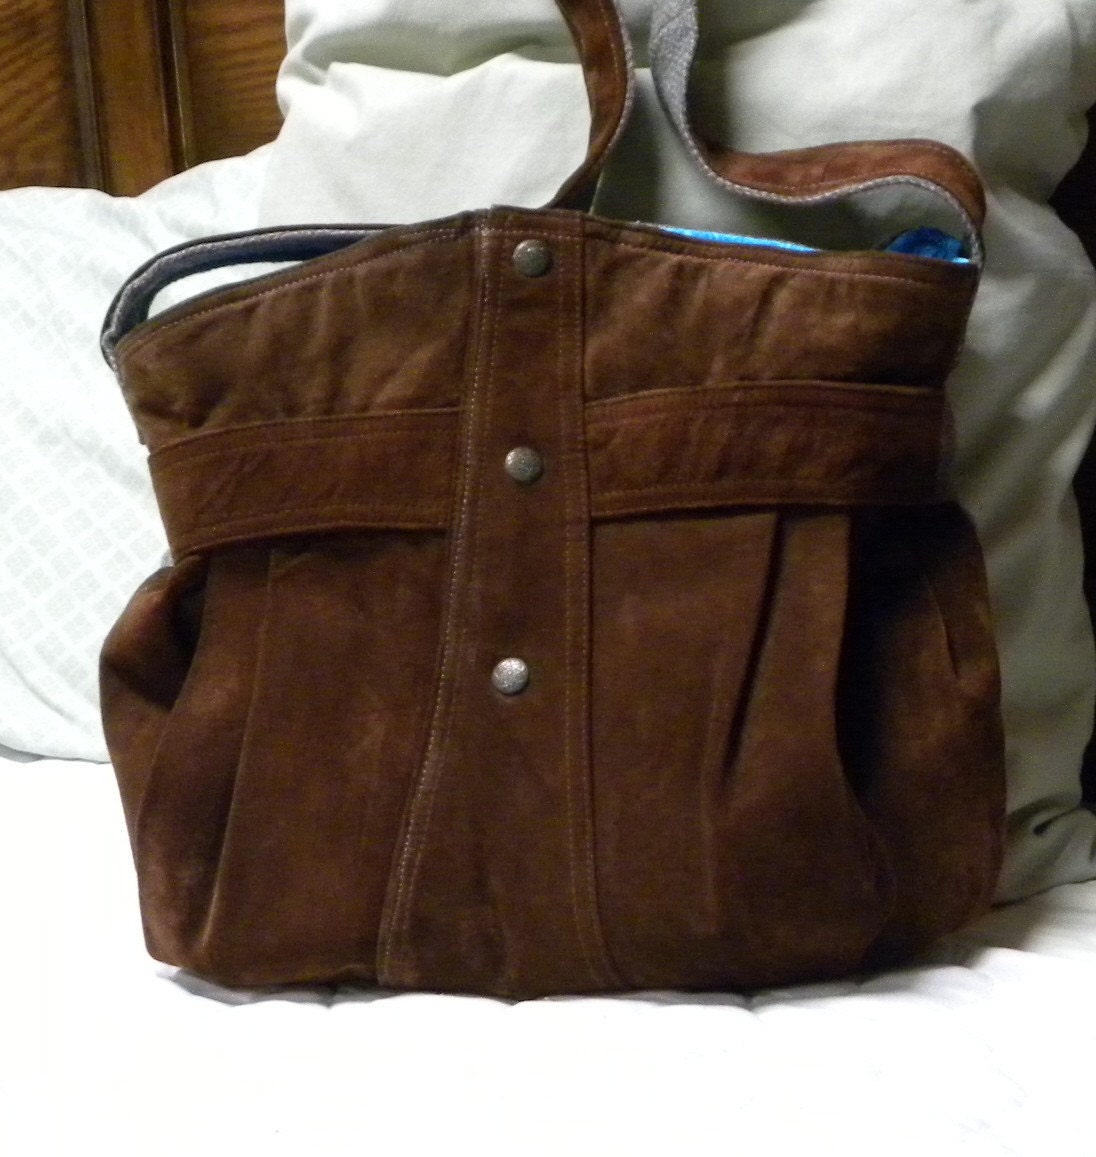 Handmade from a Rusty Brown Leather Jacket and Tweed Sport Coat - Handbag - Tote - Purse